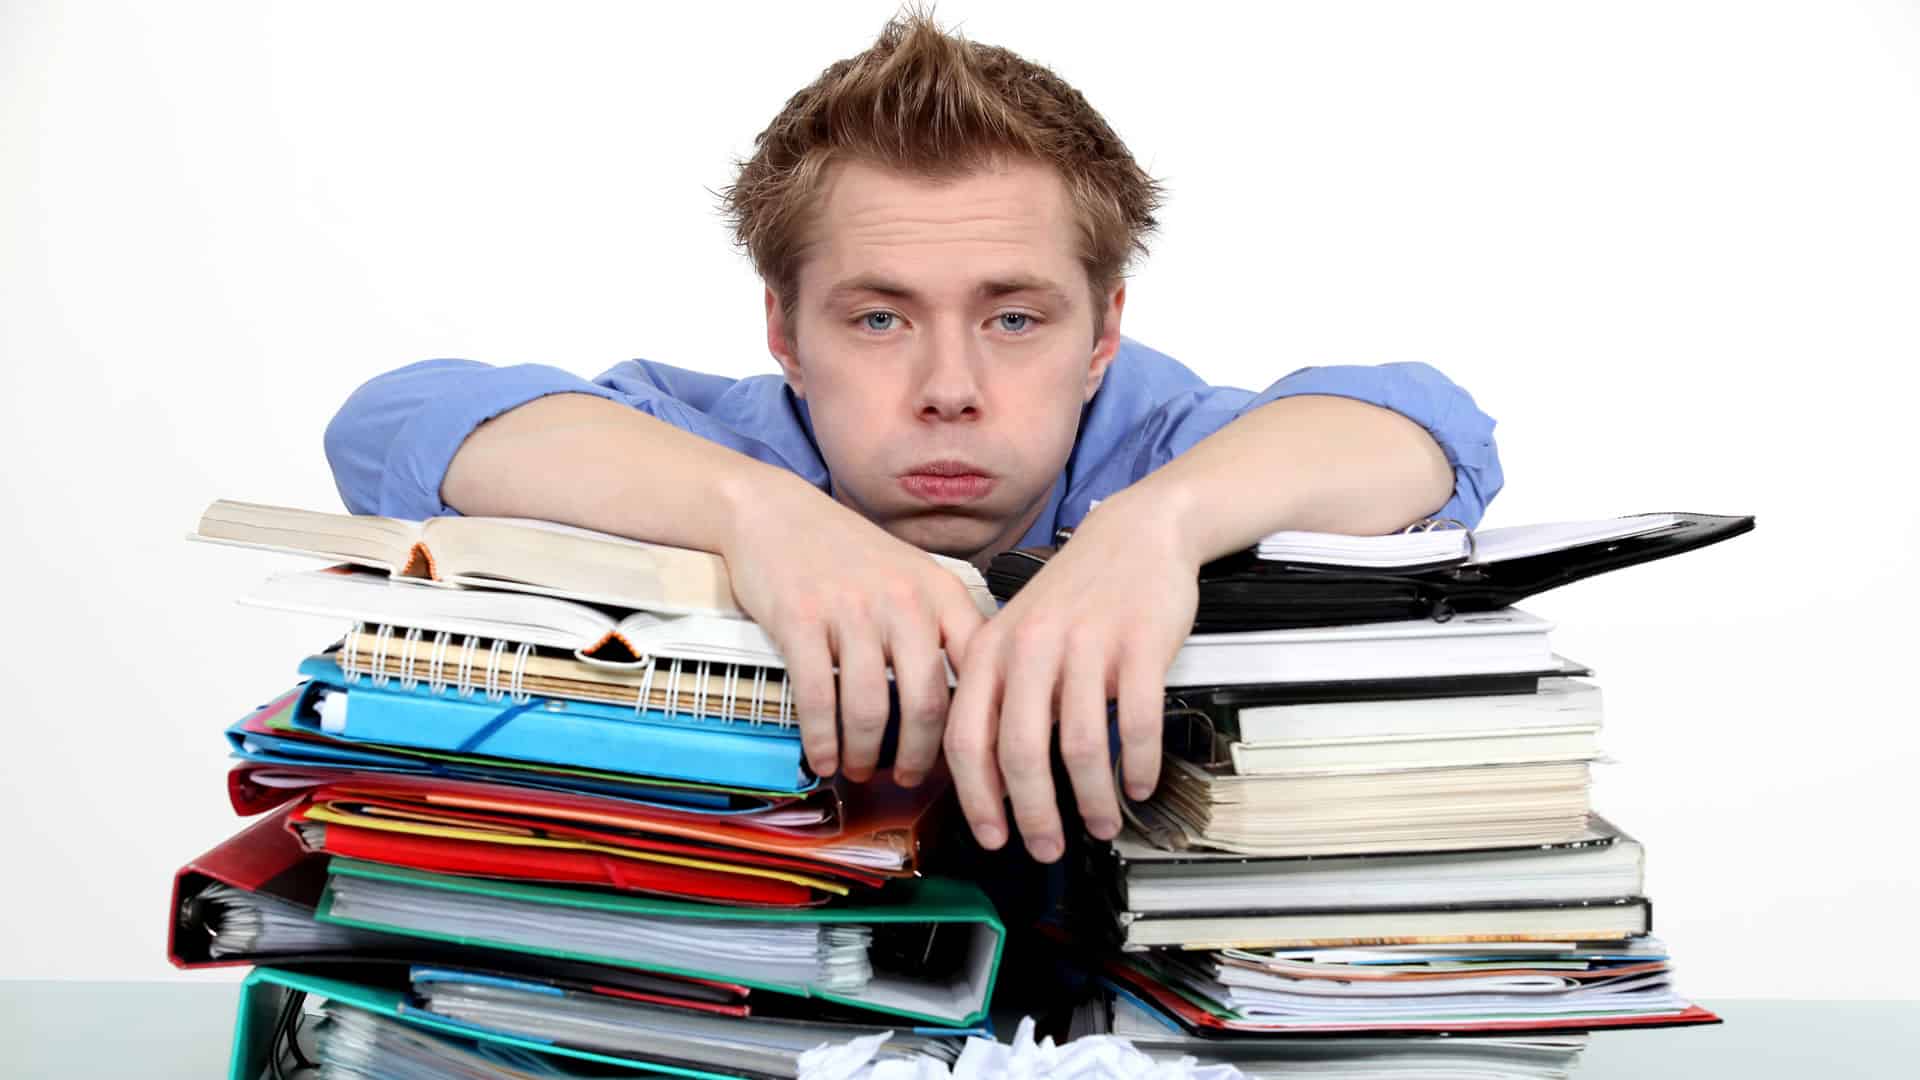 Image of a student stressed out by a heavy study workload.